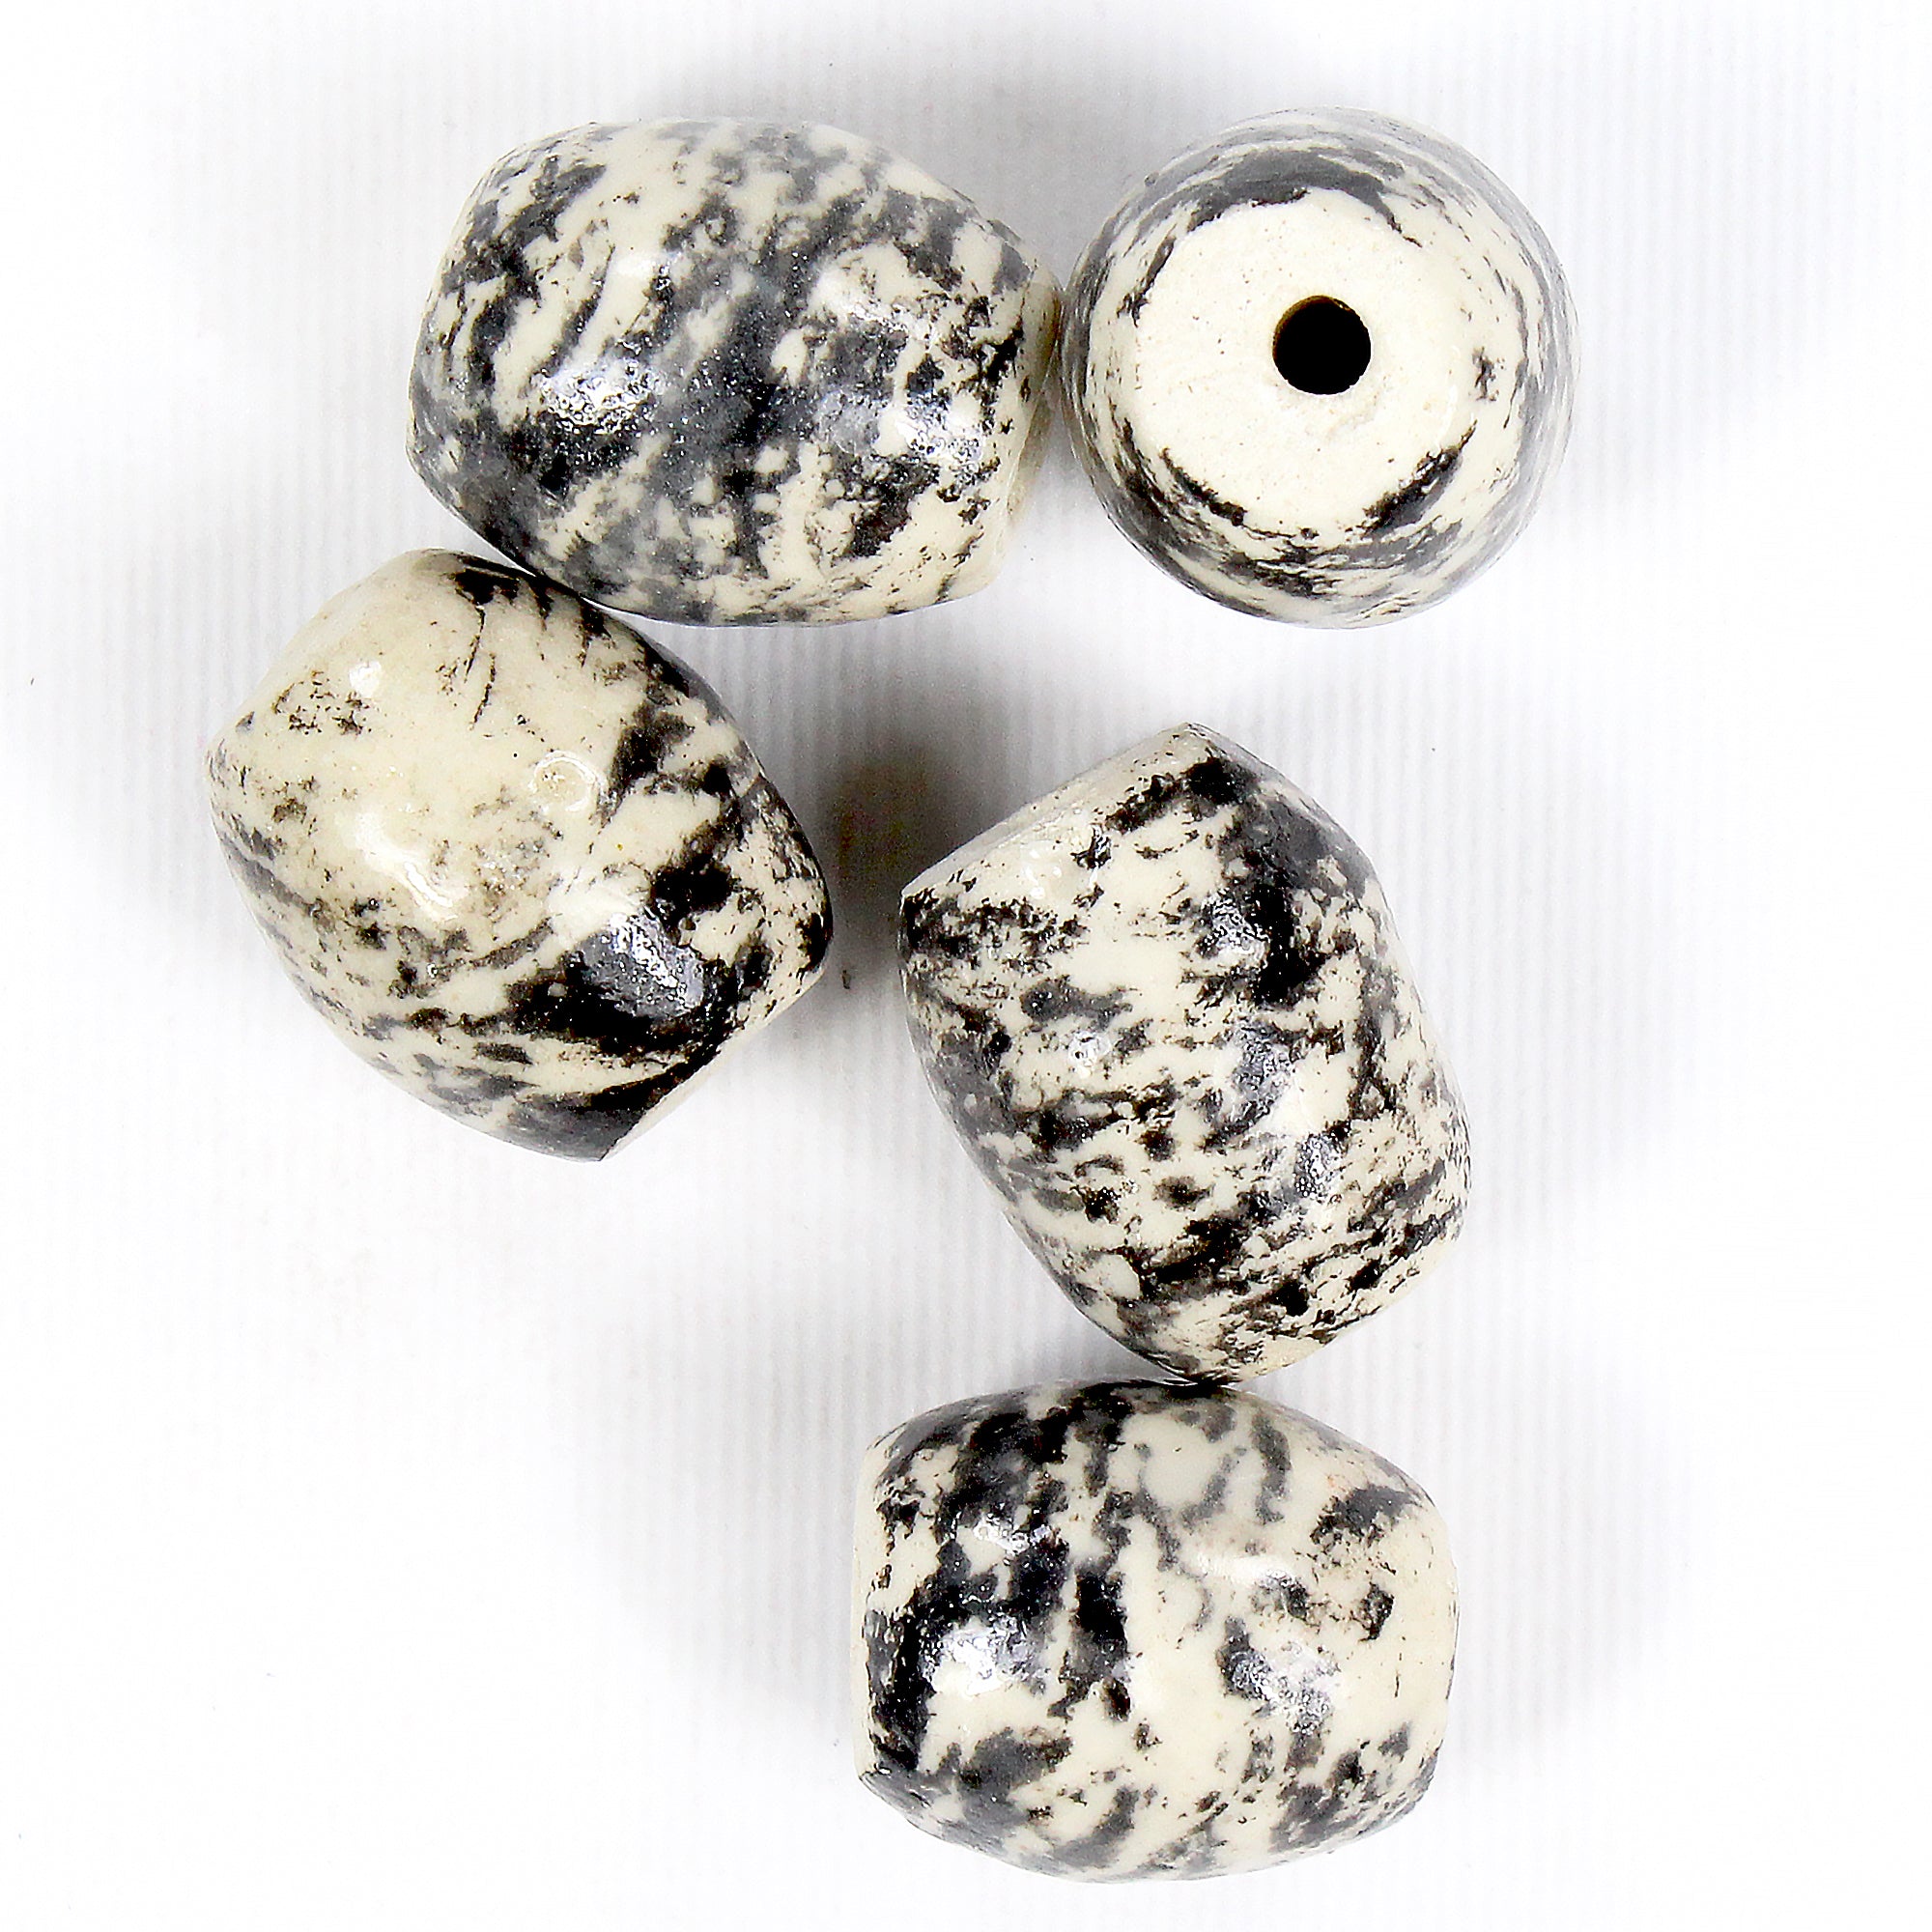 Beads Charcoal Speckled Oval 20Mm X 17Mm 30G Pb Ib